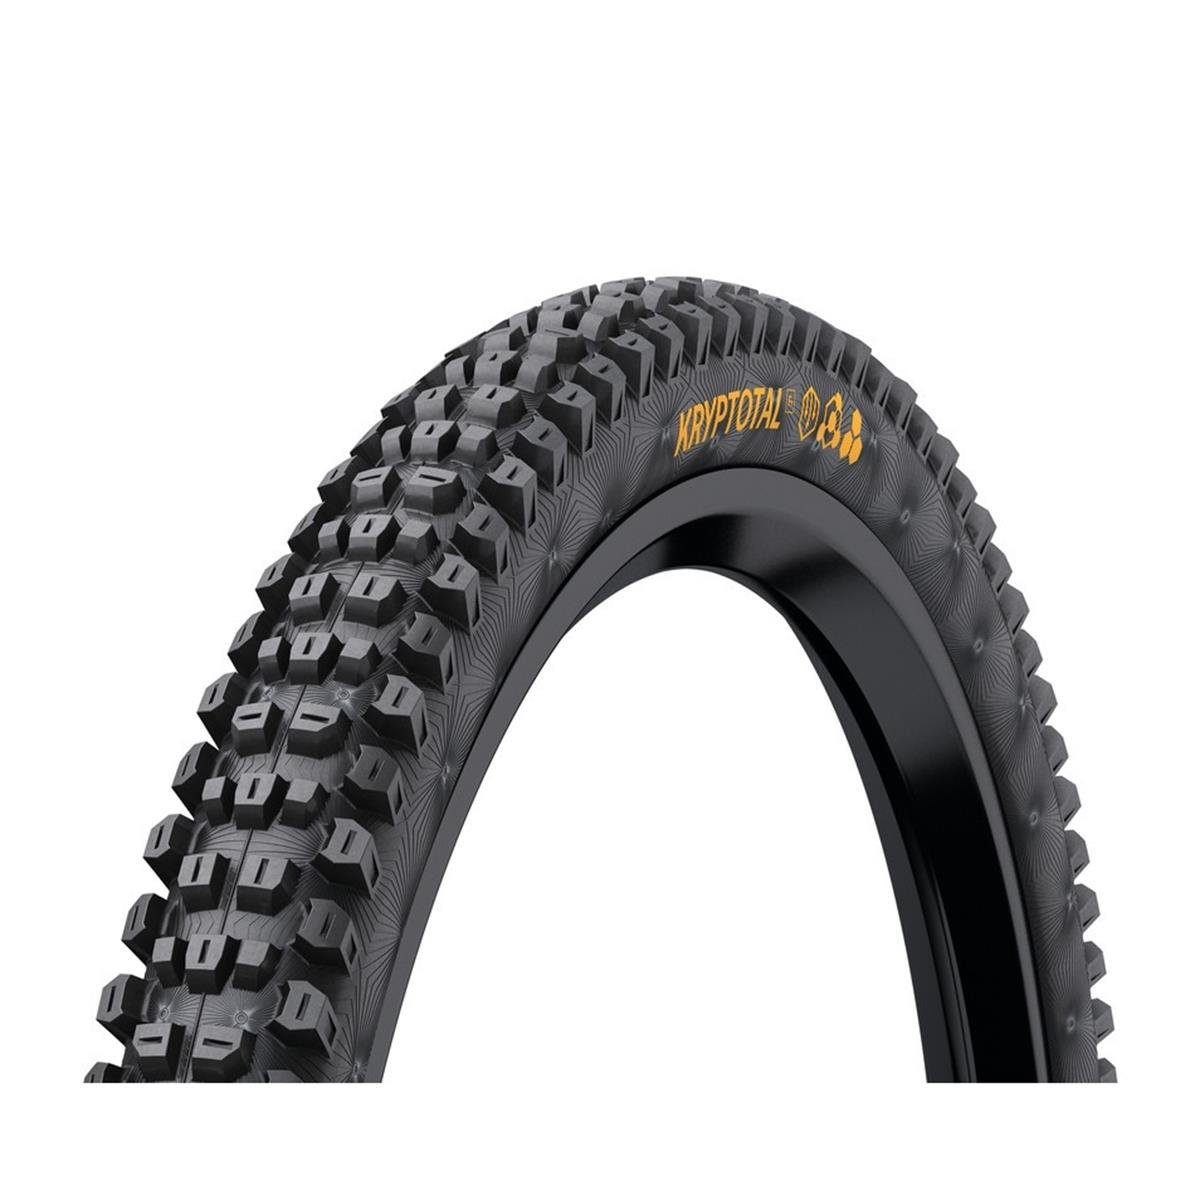 Continental MTB Tire Kryptotal Front DH 29 x 2.4 Zoll, DH-Casing, Super Soft-Compound, TR